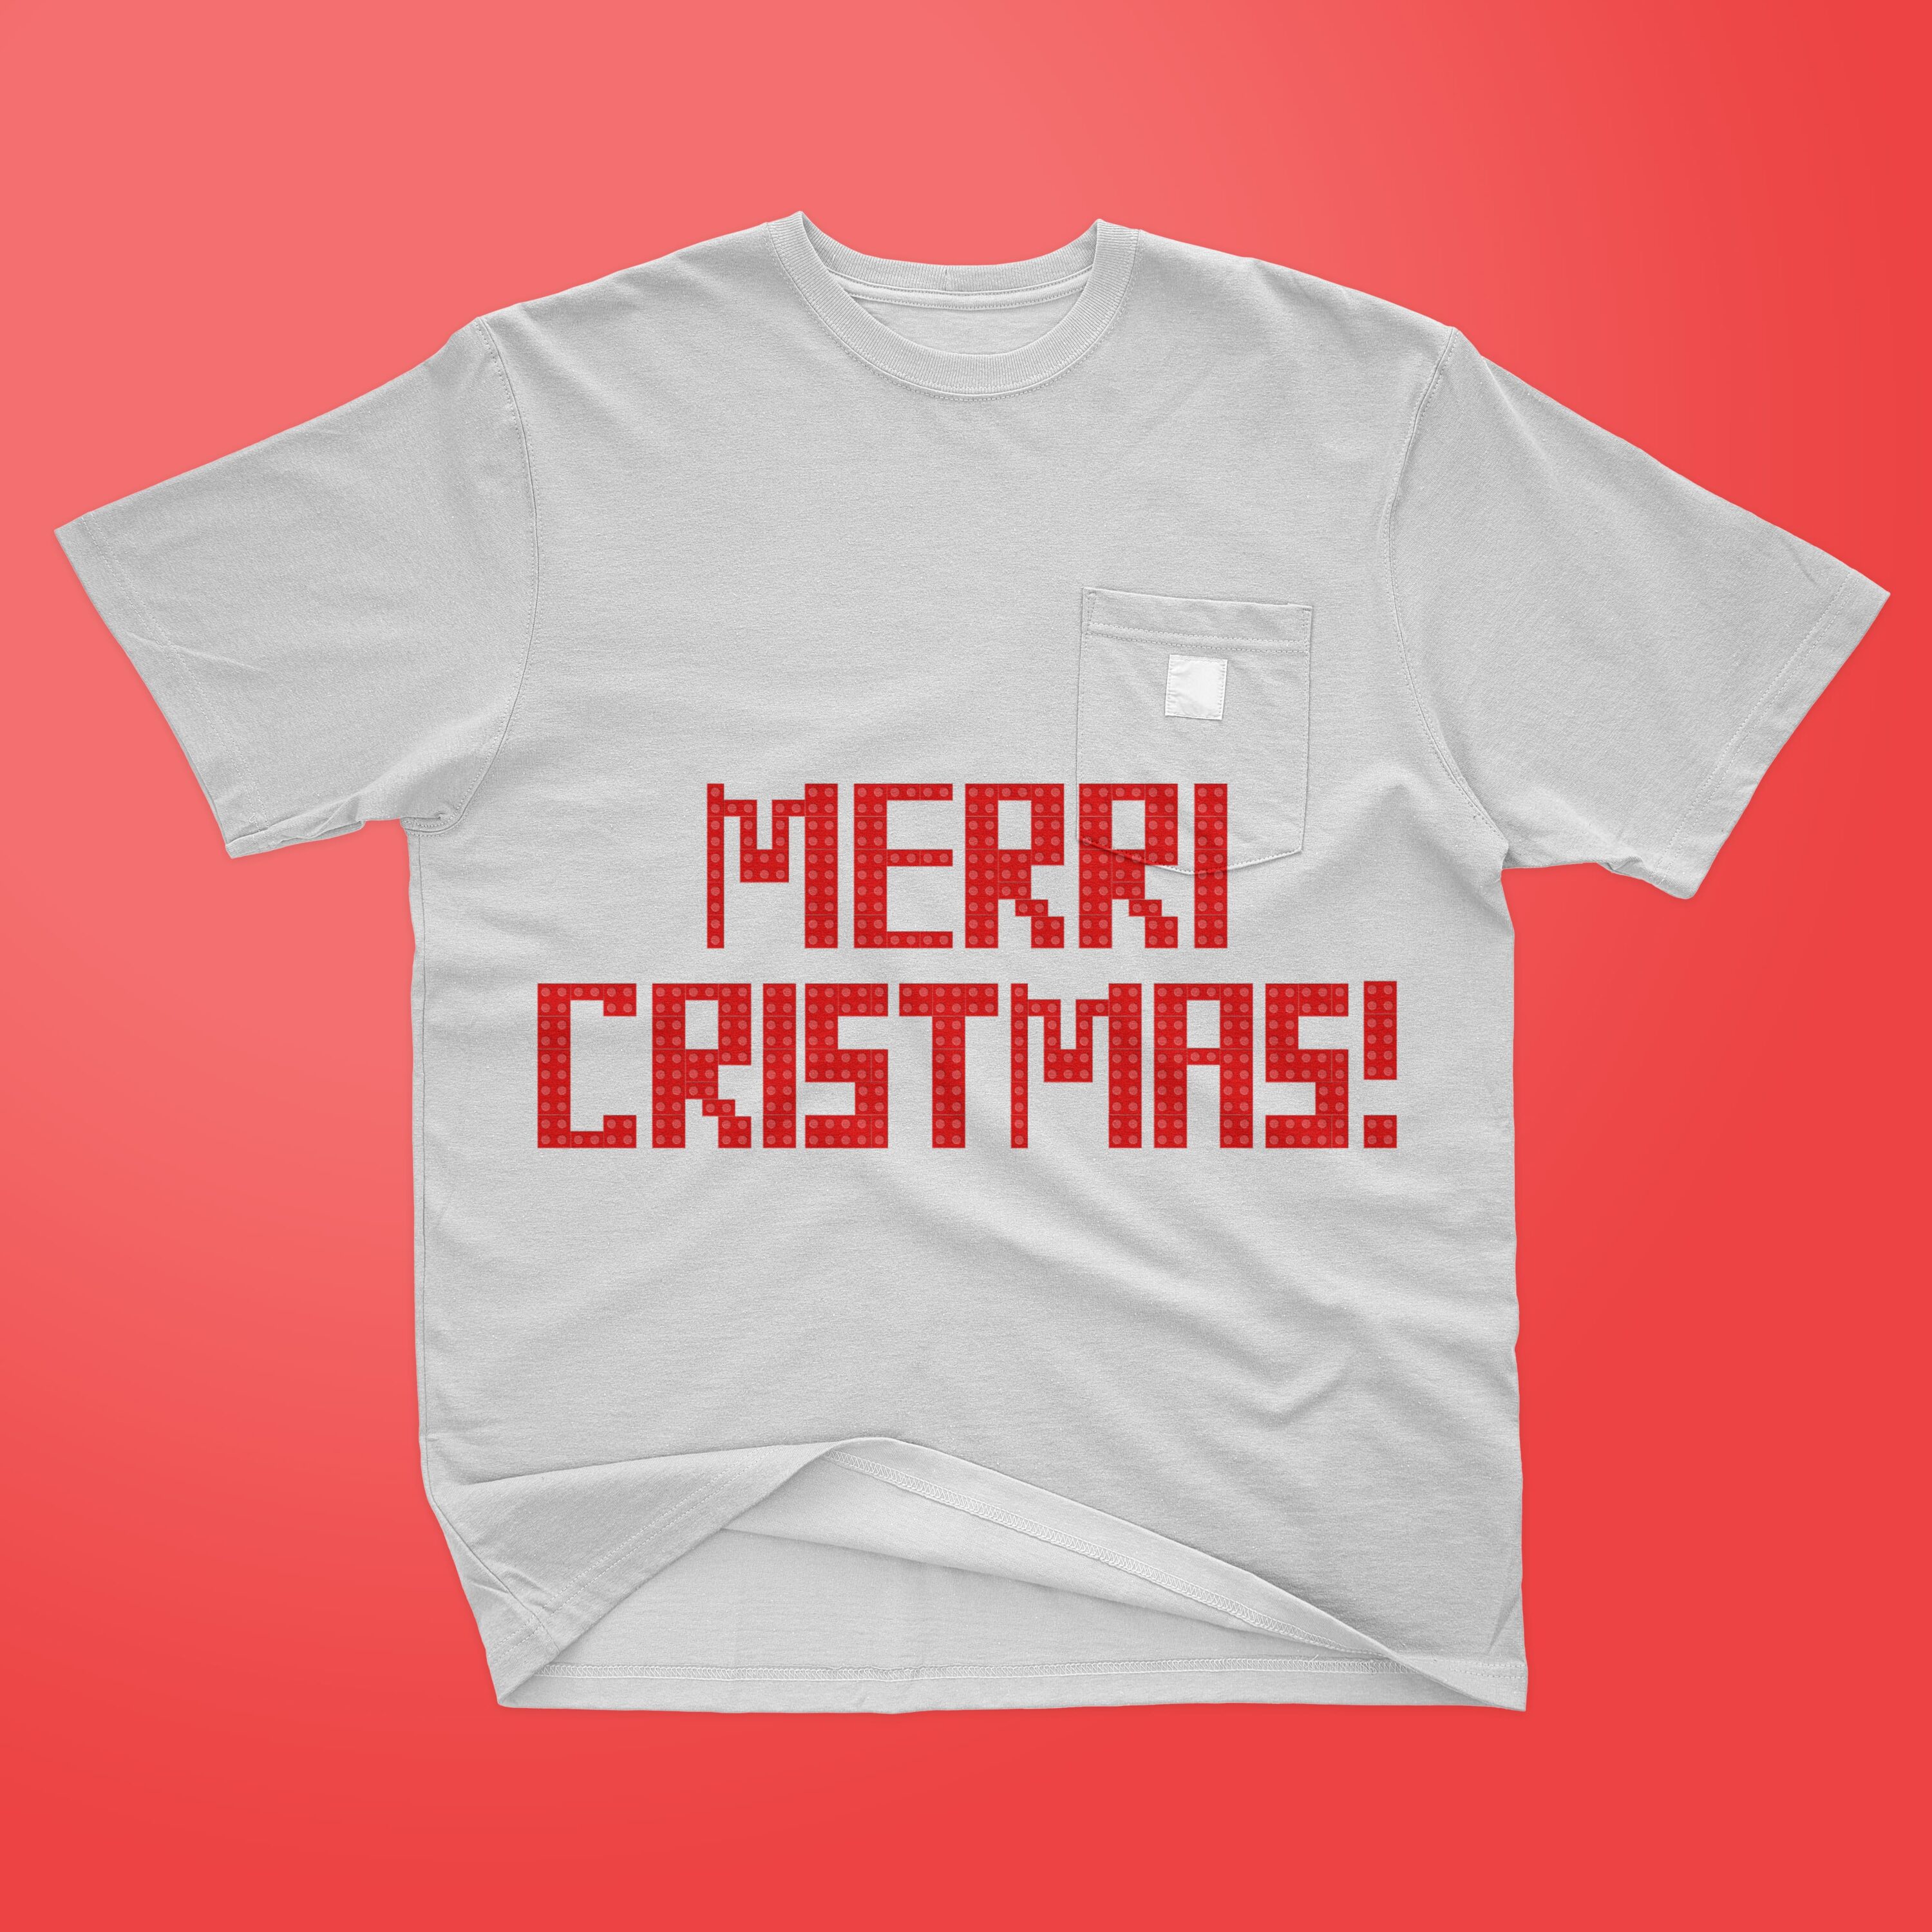 Celebrate christmas with this cool t-shirt design.